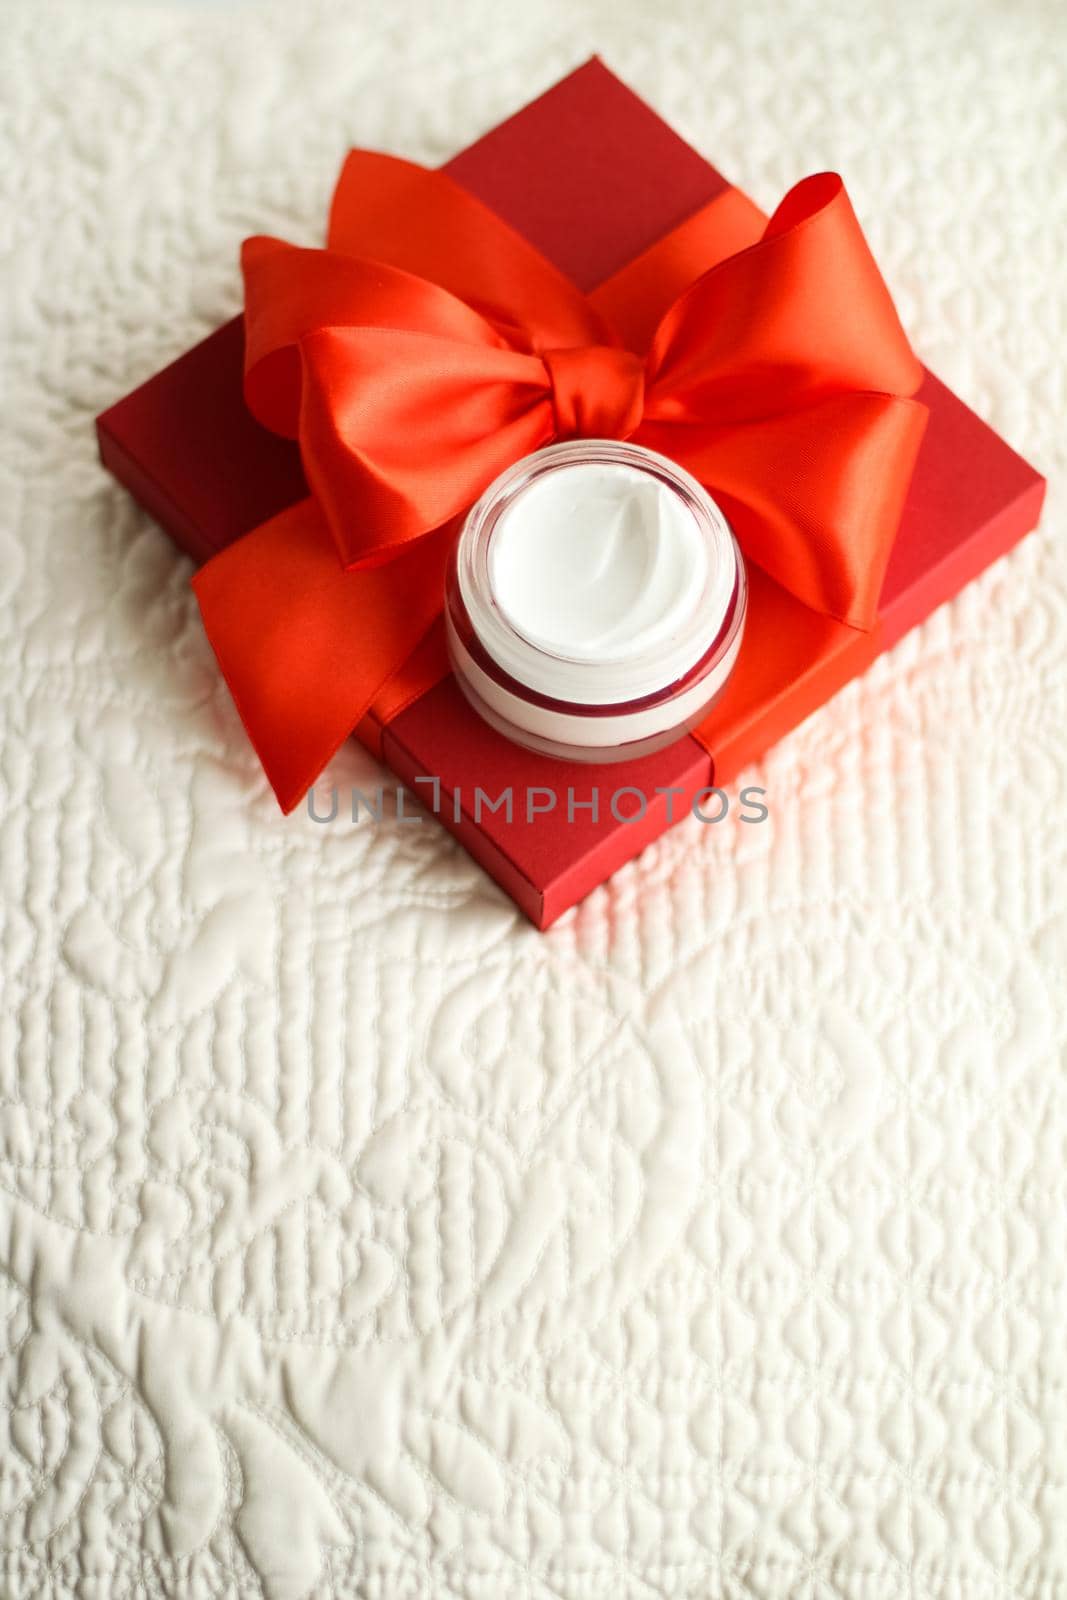 Beauty, cosmetics and skincare styled concept - Luxury face cream jar and red gift box